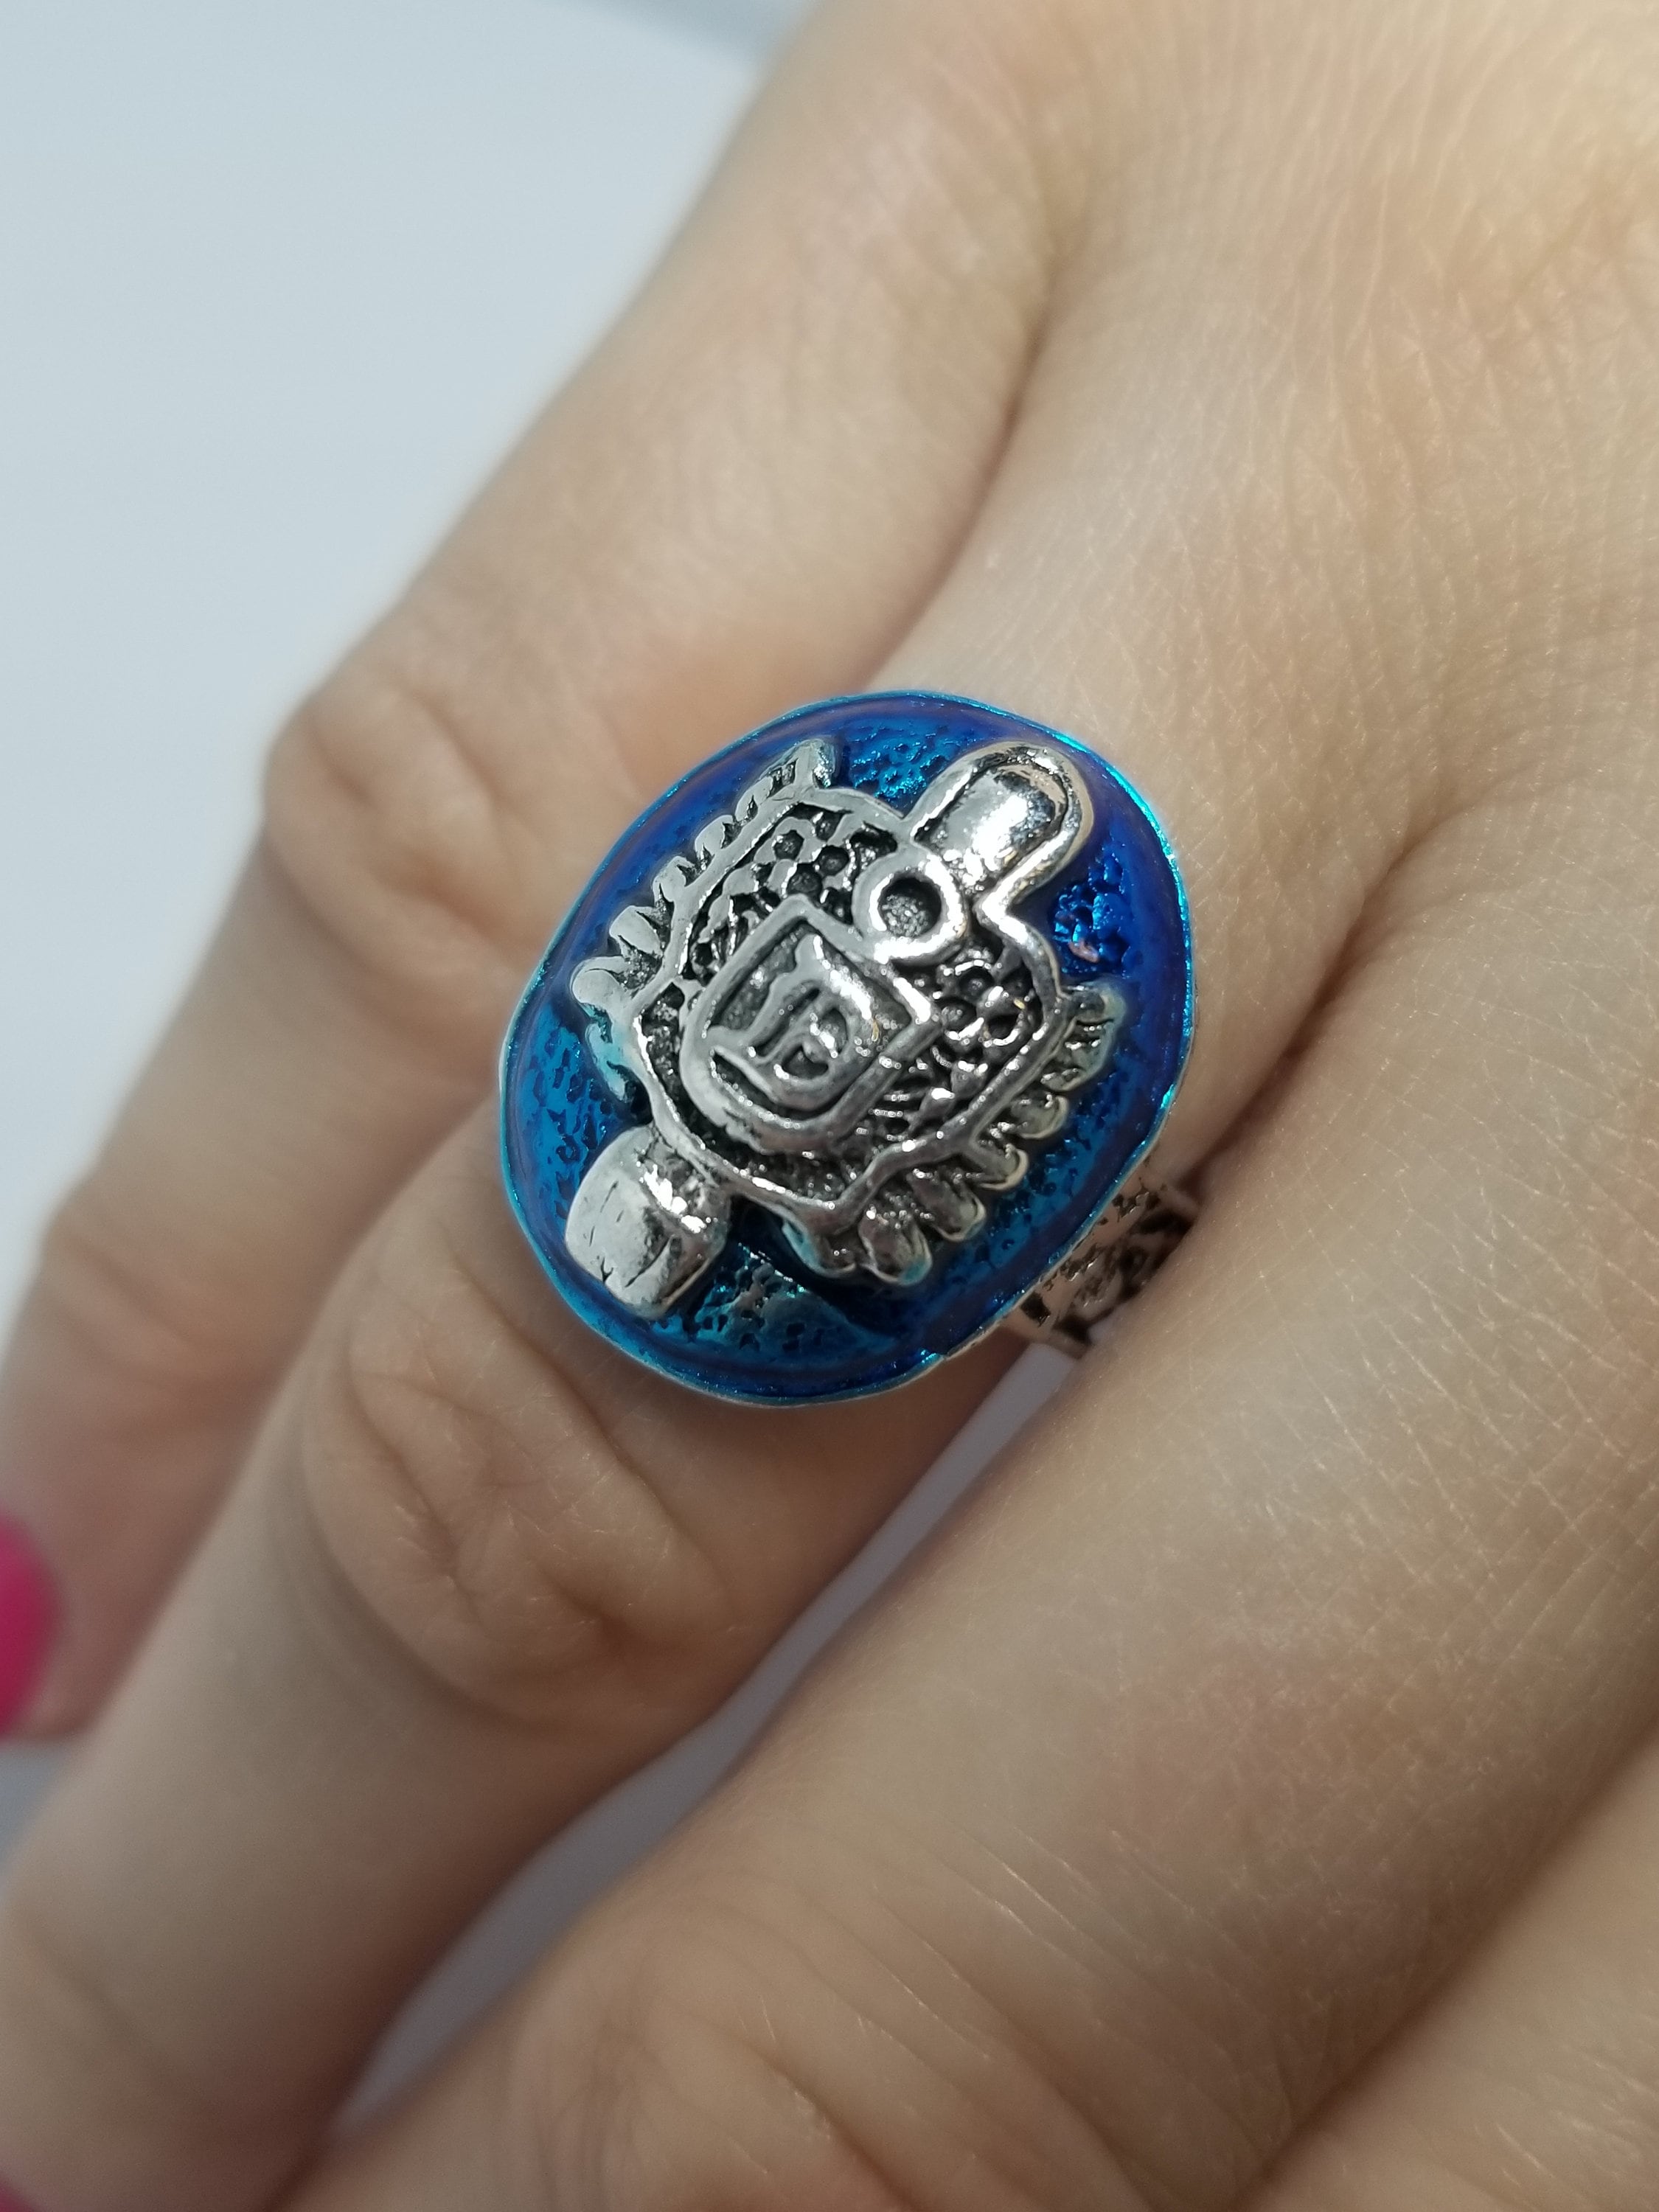 The Vampire Diaries Rings Real 925 Sterling Silver Damon Salvatore Ring  Men's With Lapis Lazuli Natural Stone Customized Jewelry | Ian Somerhalder  From Vampire Diaries